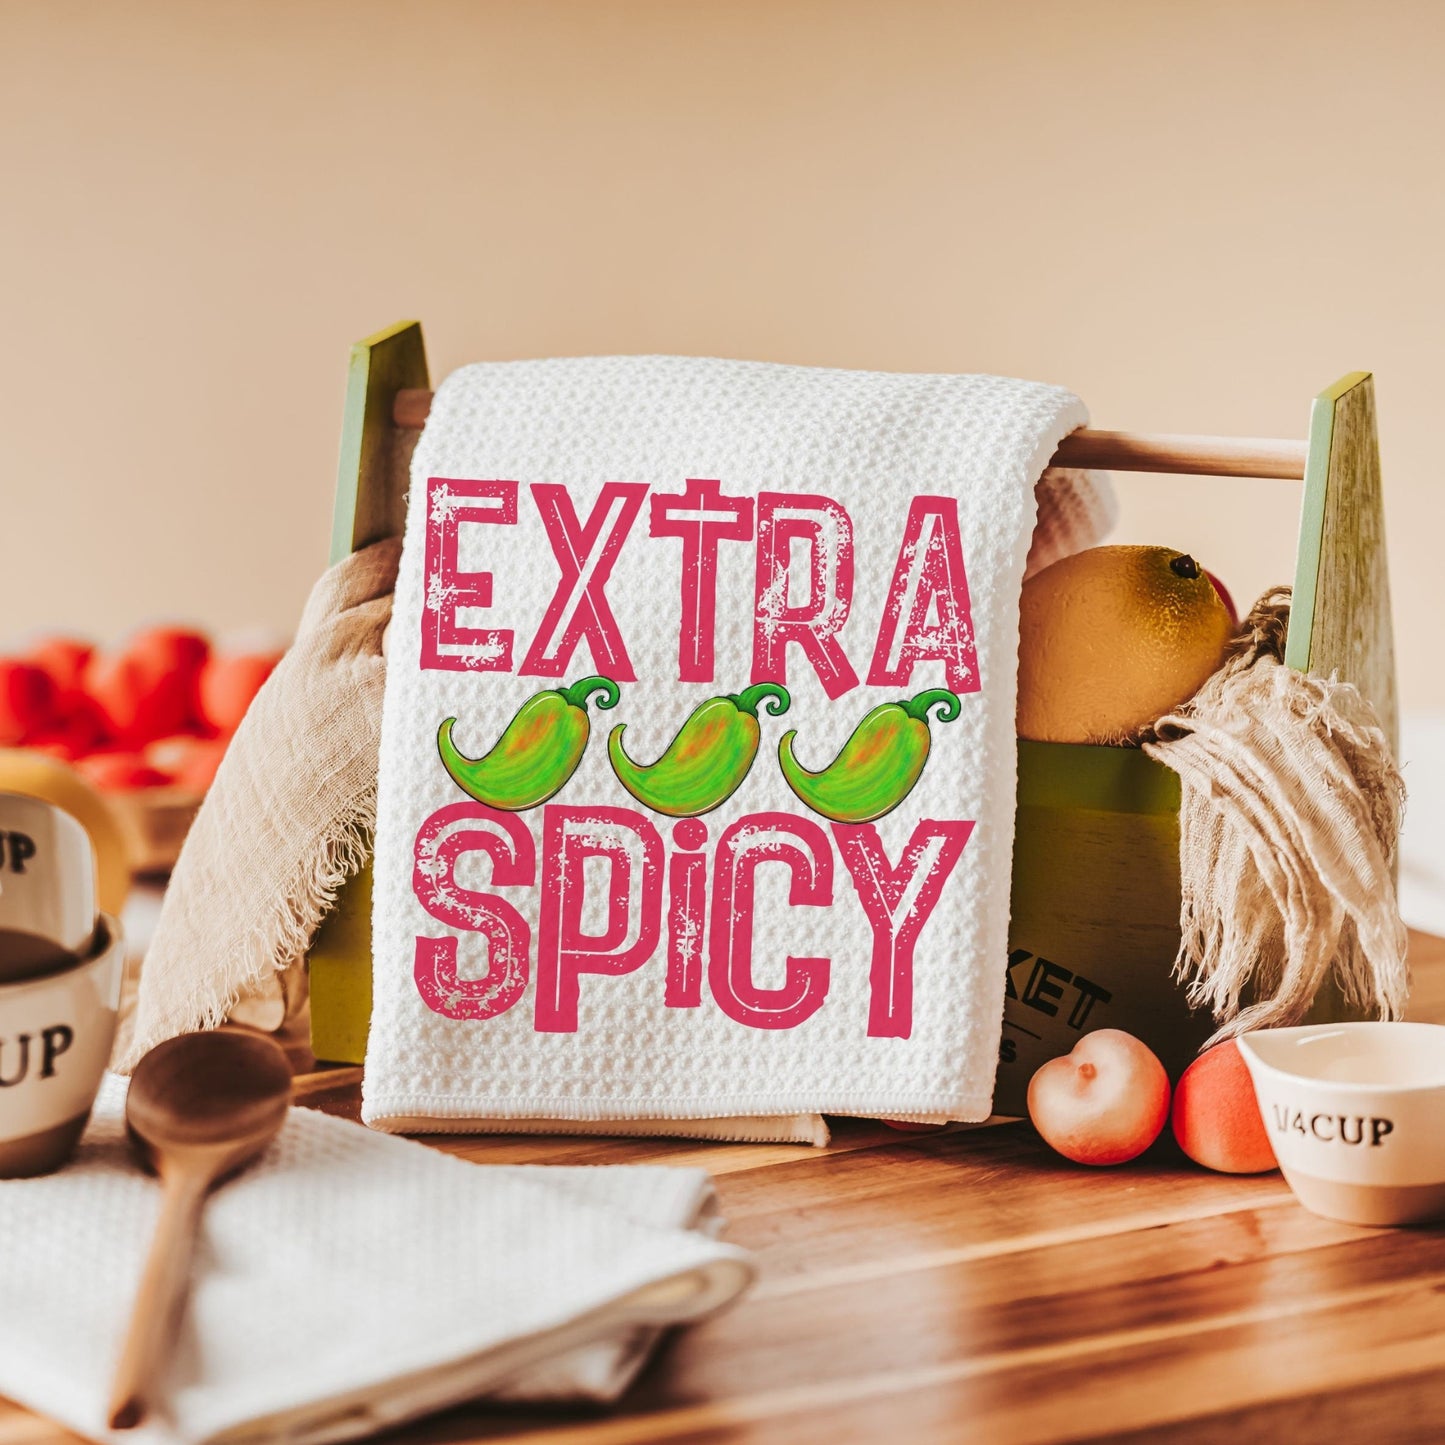 Extra spicy kitchen towels